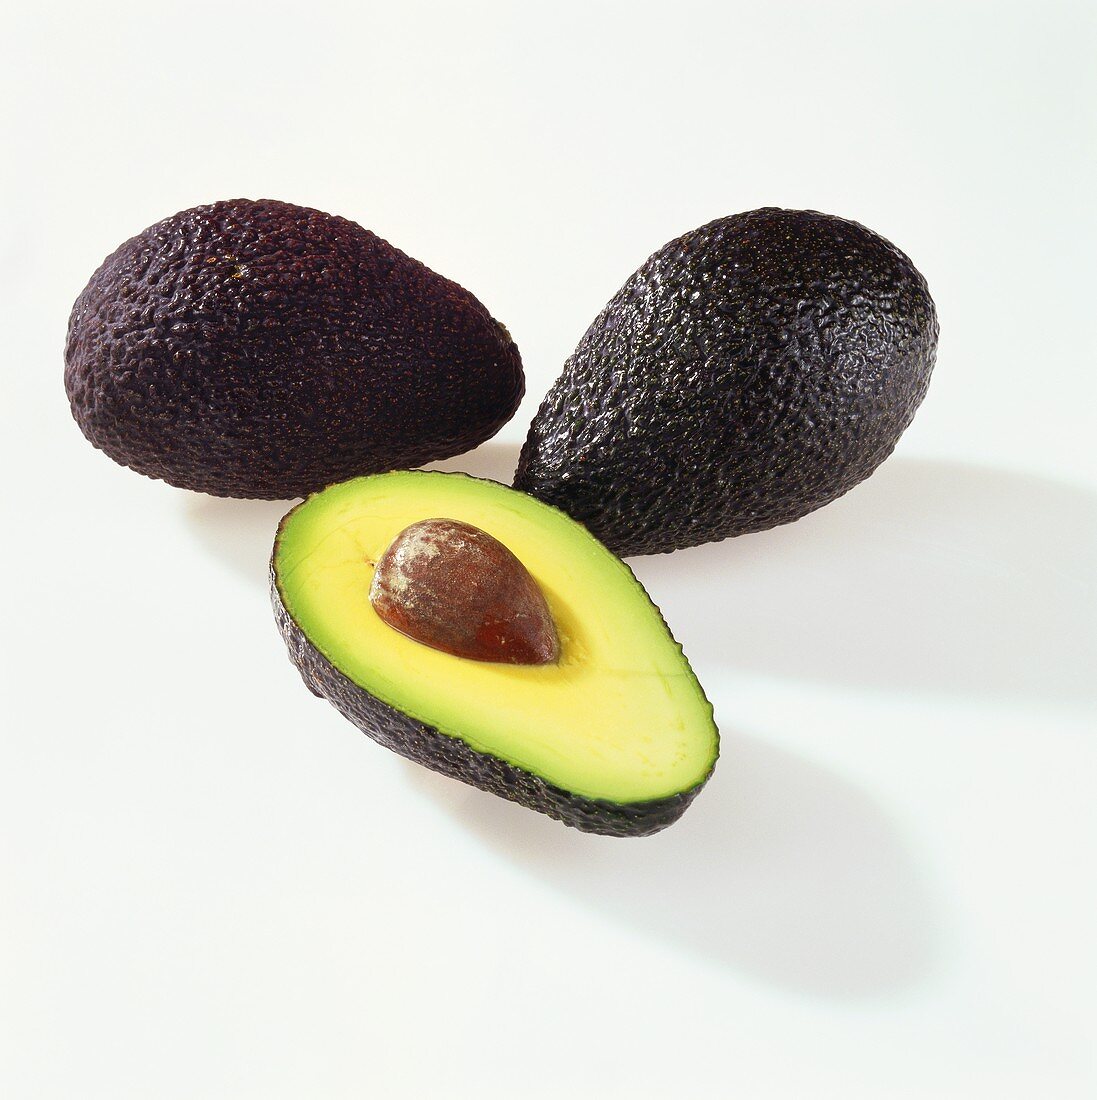 Avocados, 'Hass' variety